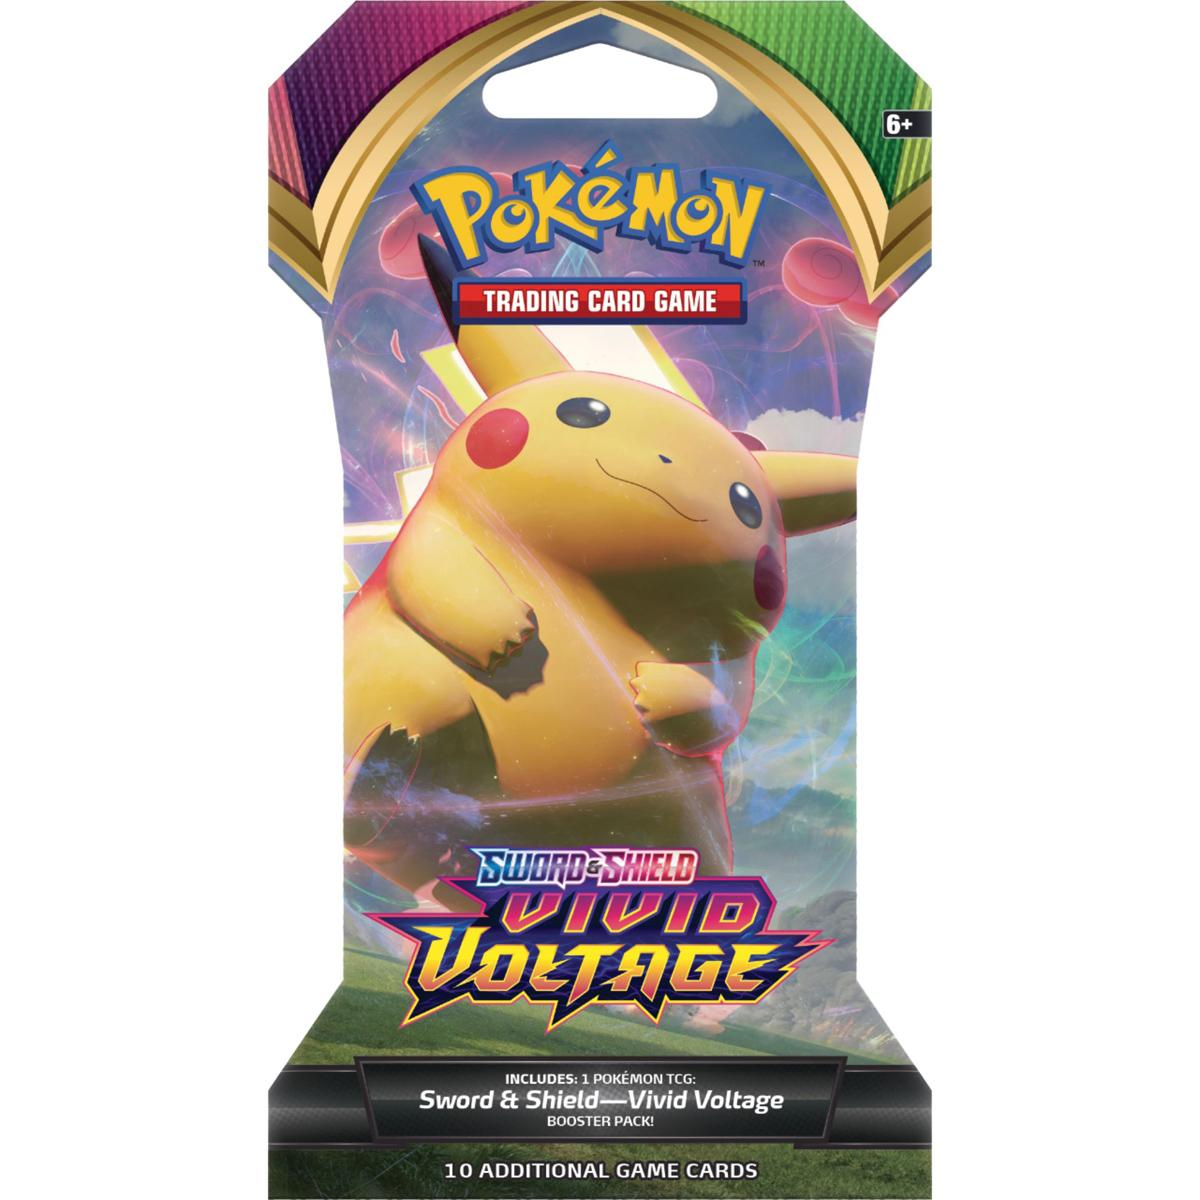 Pokemon Trading Card Game Sword and Shield Vivid Voltage for $3.99